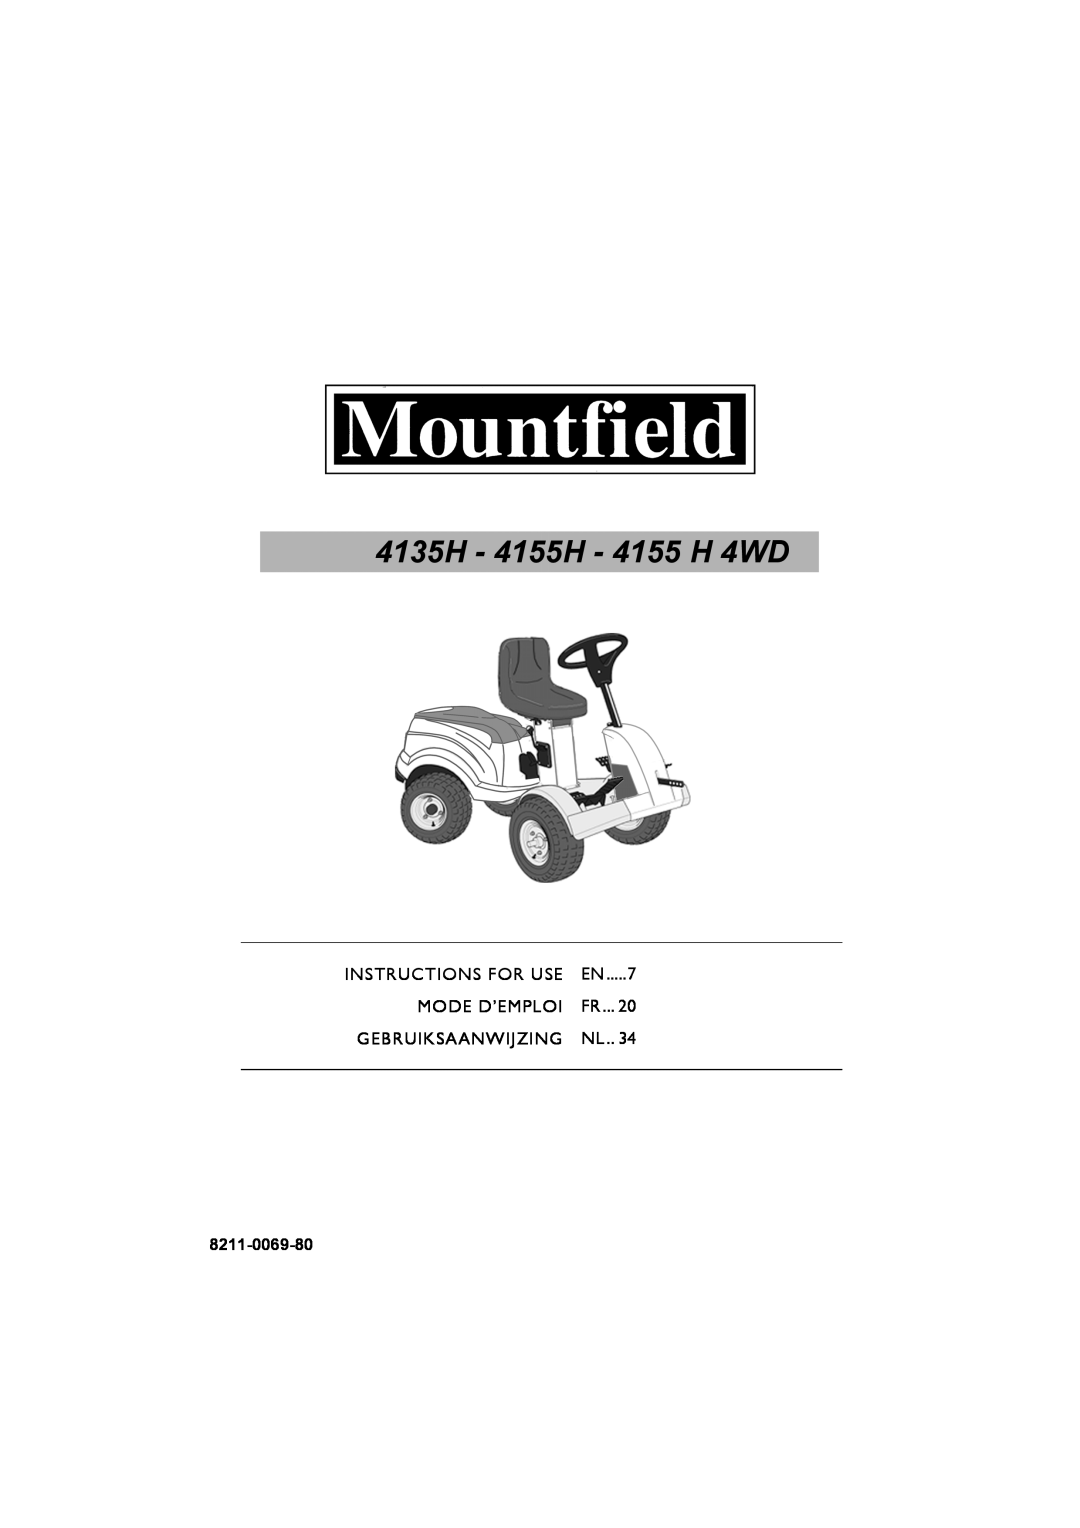 Mountfield manual 8211-0069-80, 4135H - 4155H - 4155 H 4WD, Instructions For Use 